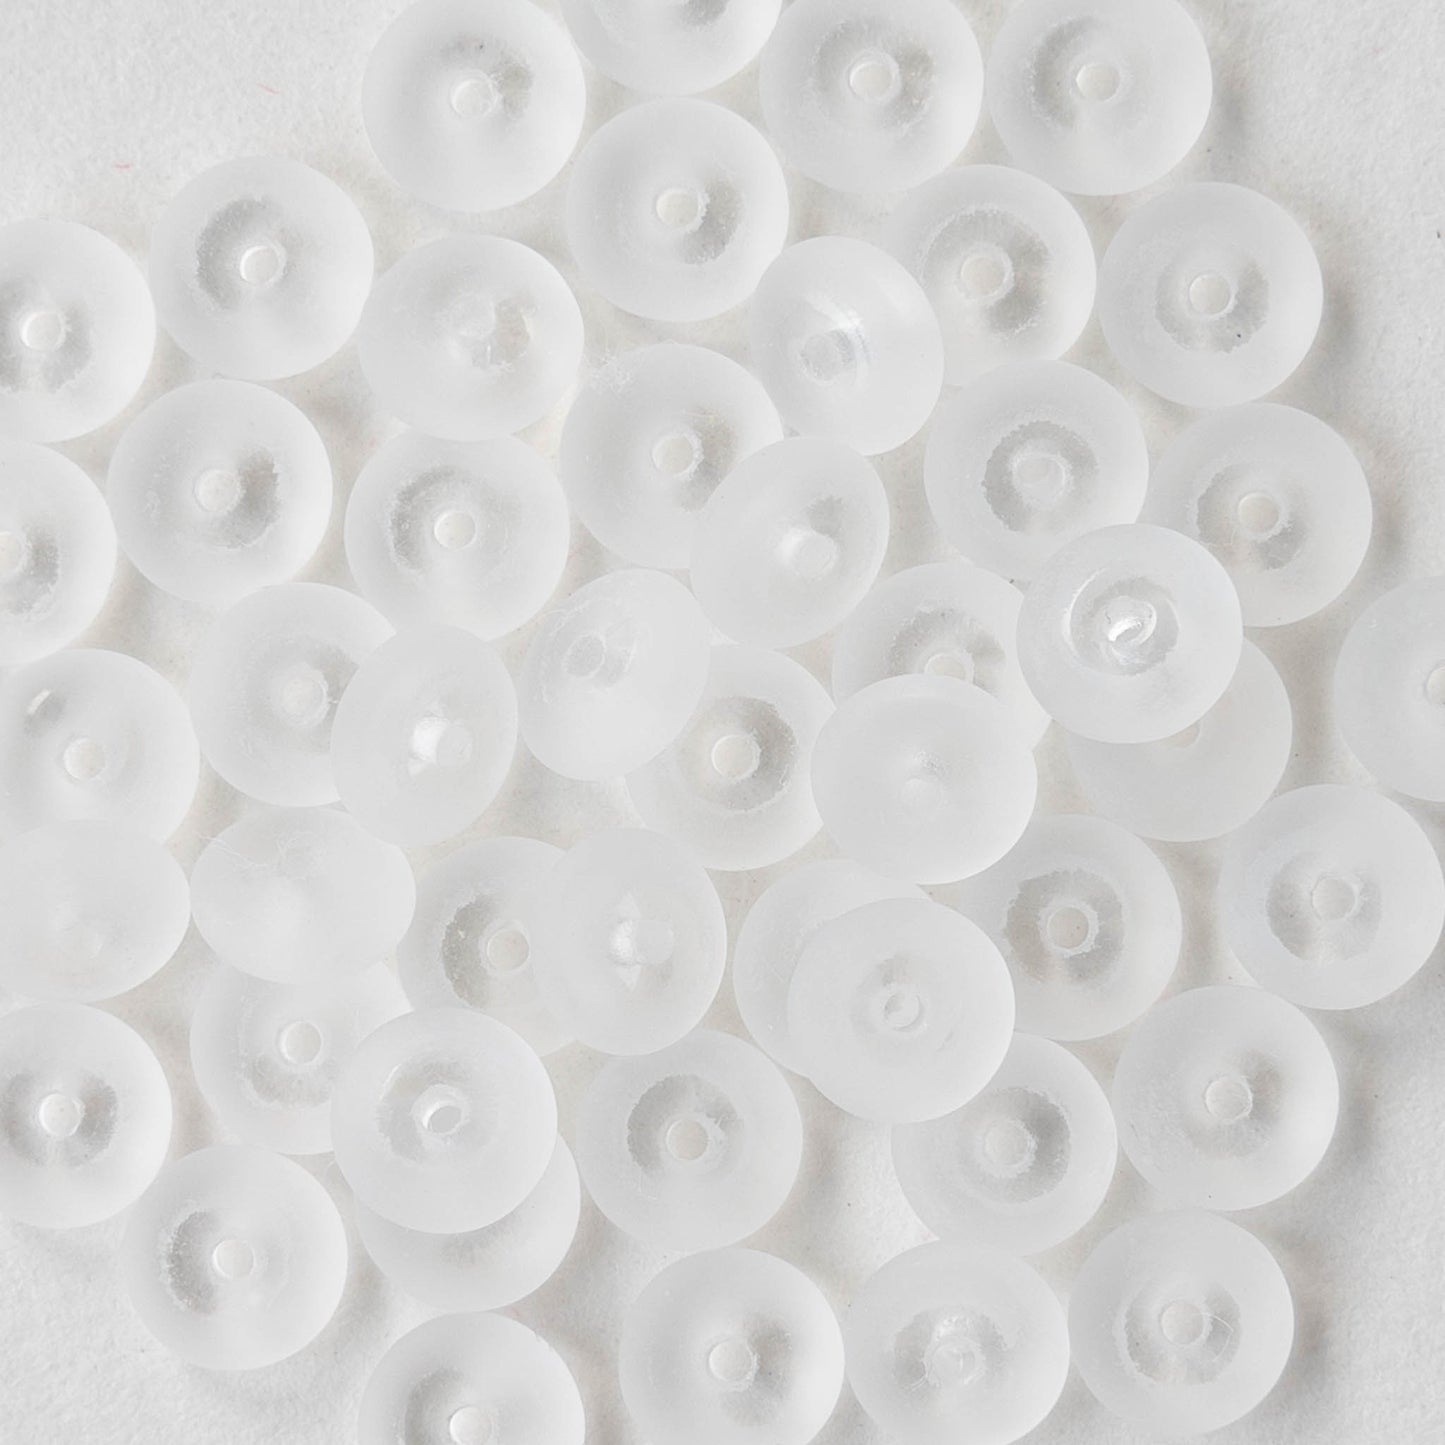 6mm Rondelle Beads - Crystal Matte - 100 Beads